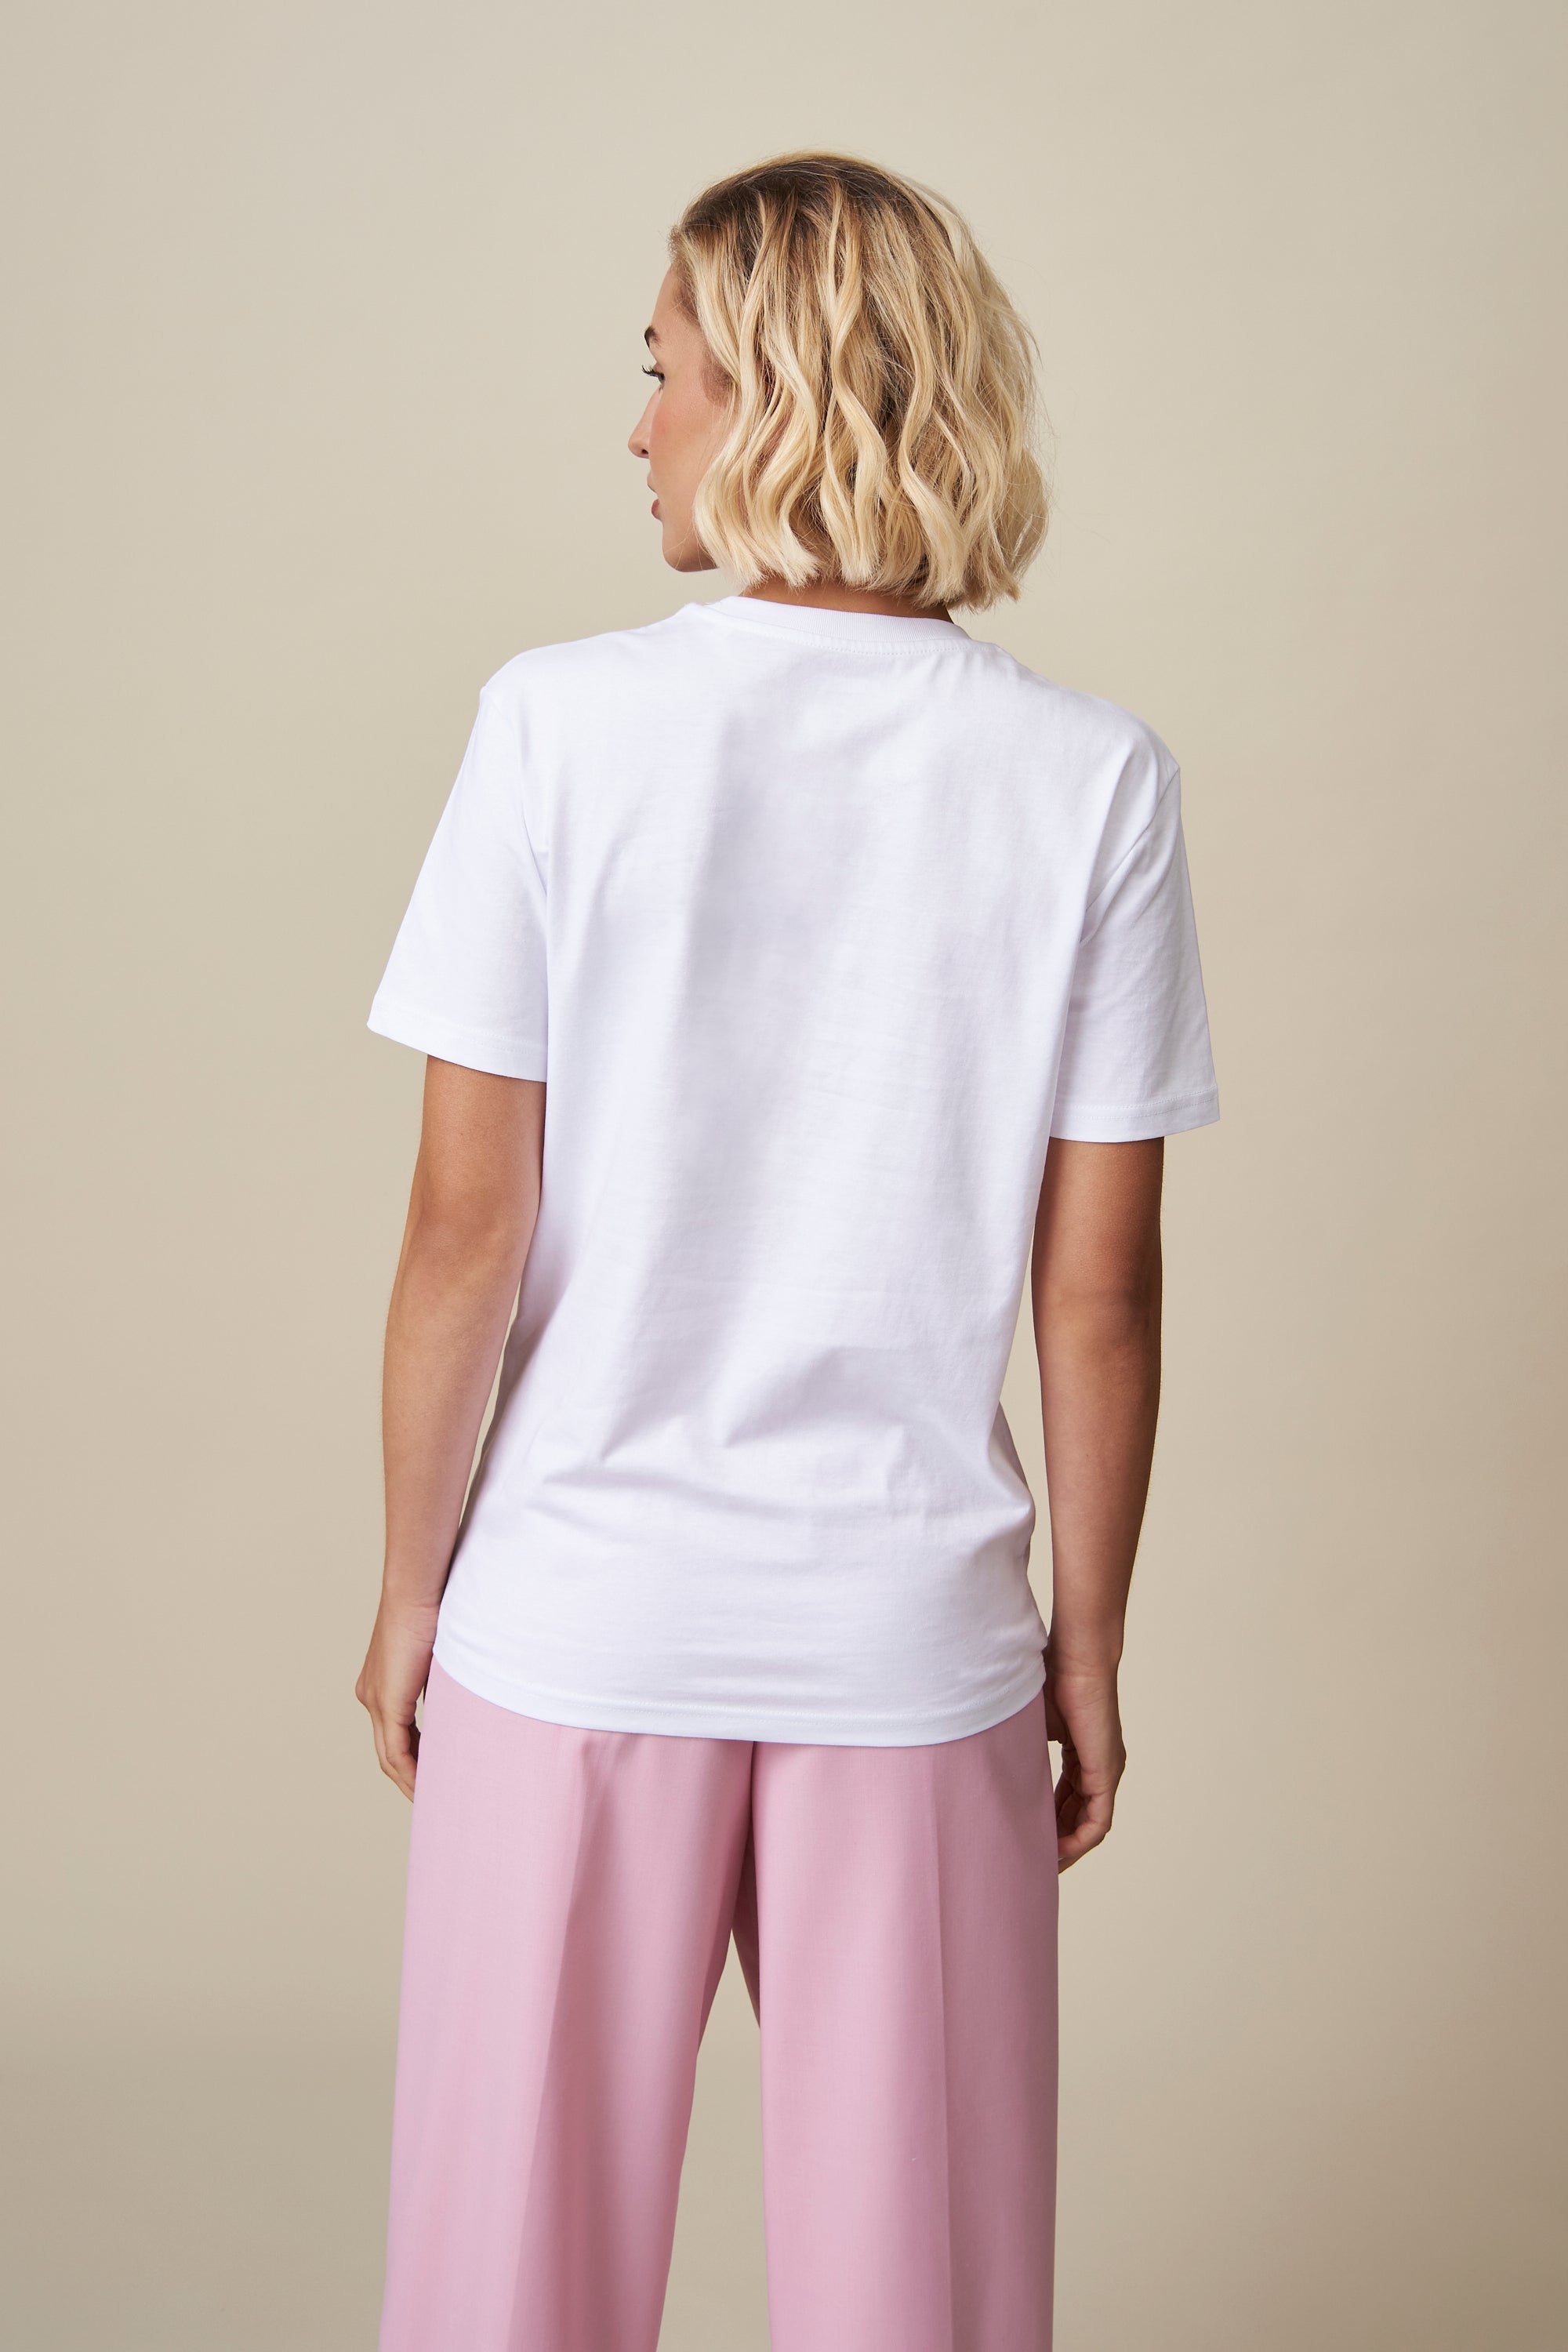 Loulou T-Shirt - Weiß / Pastell